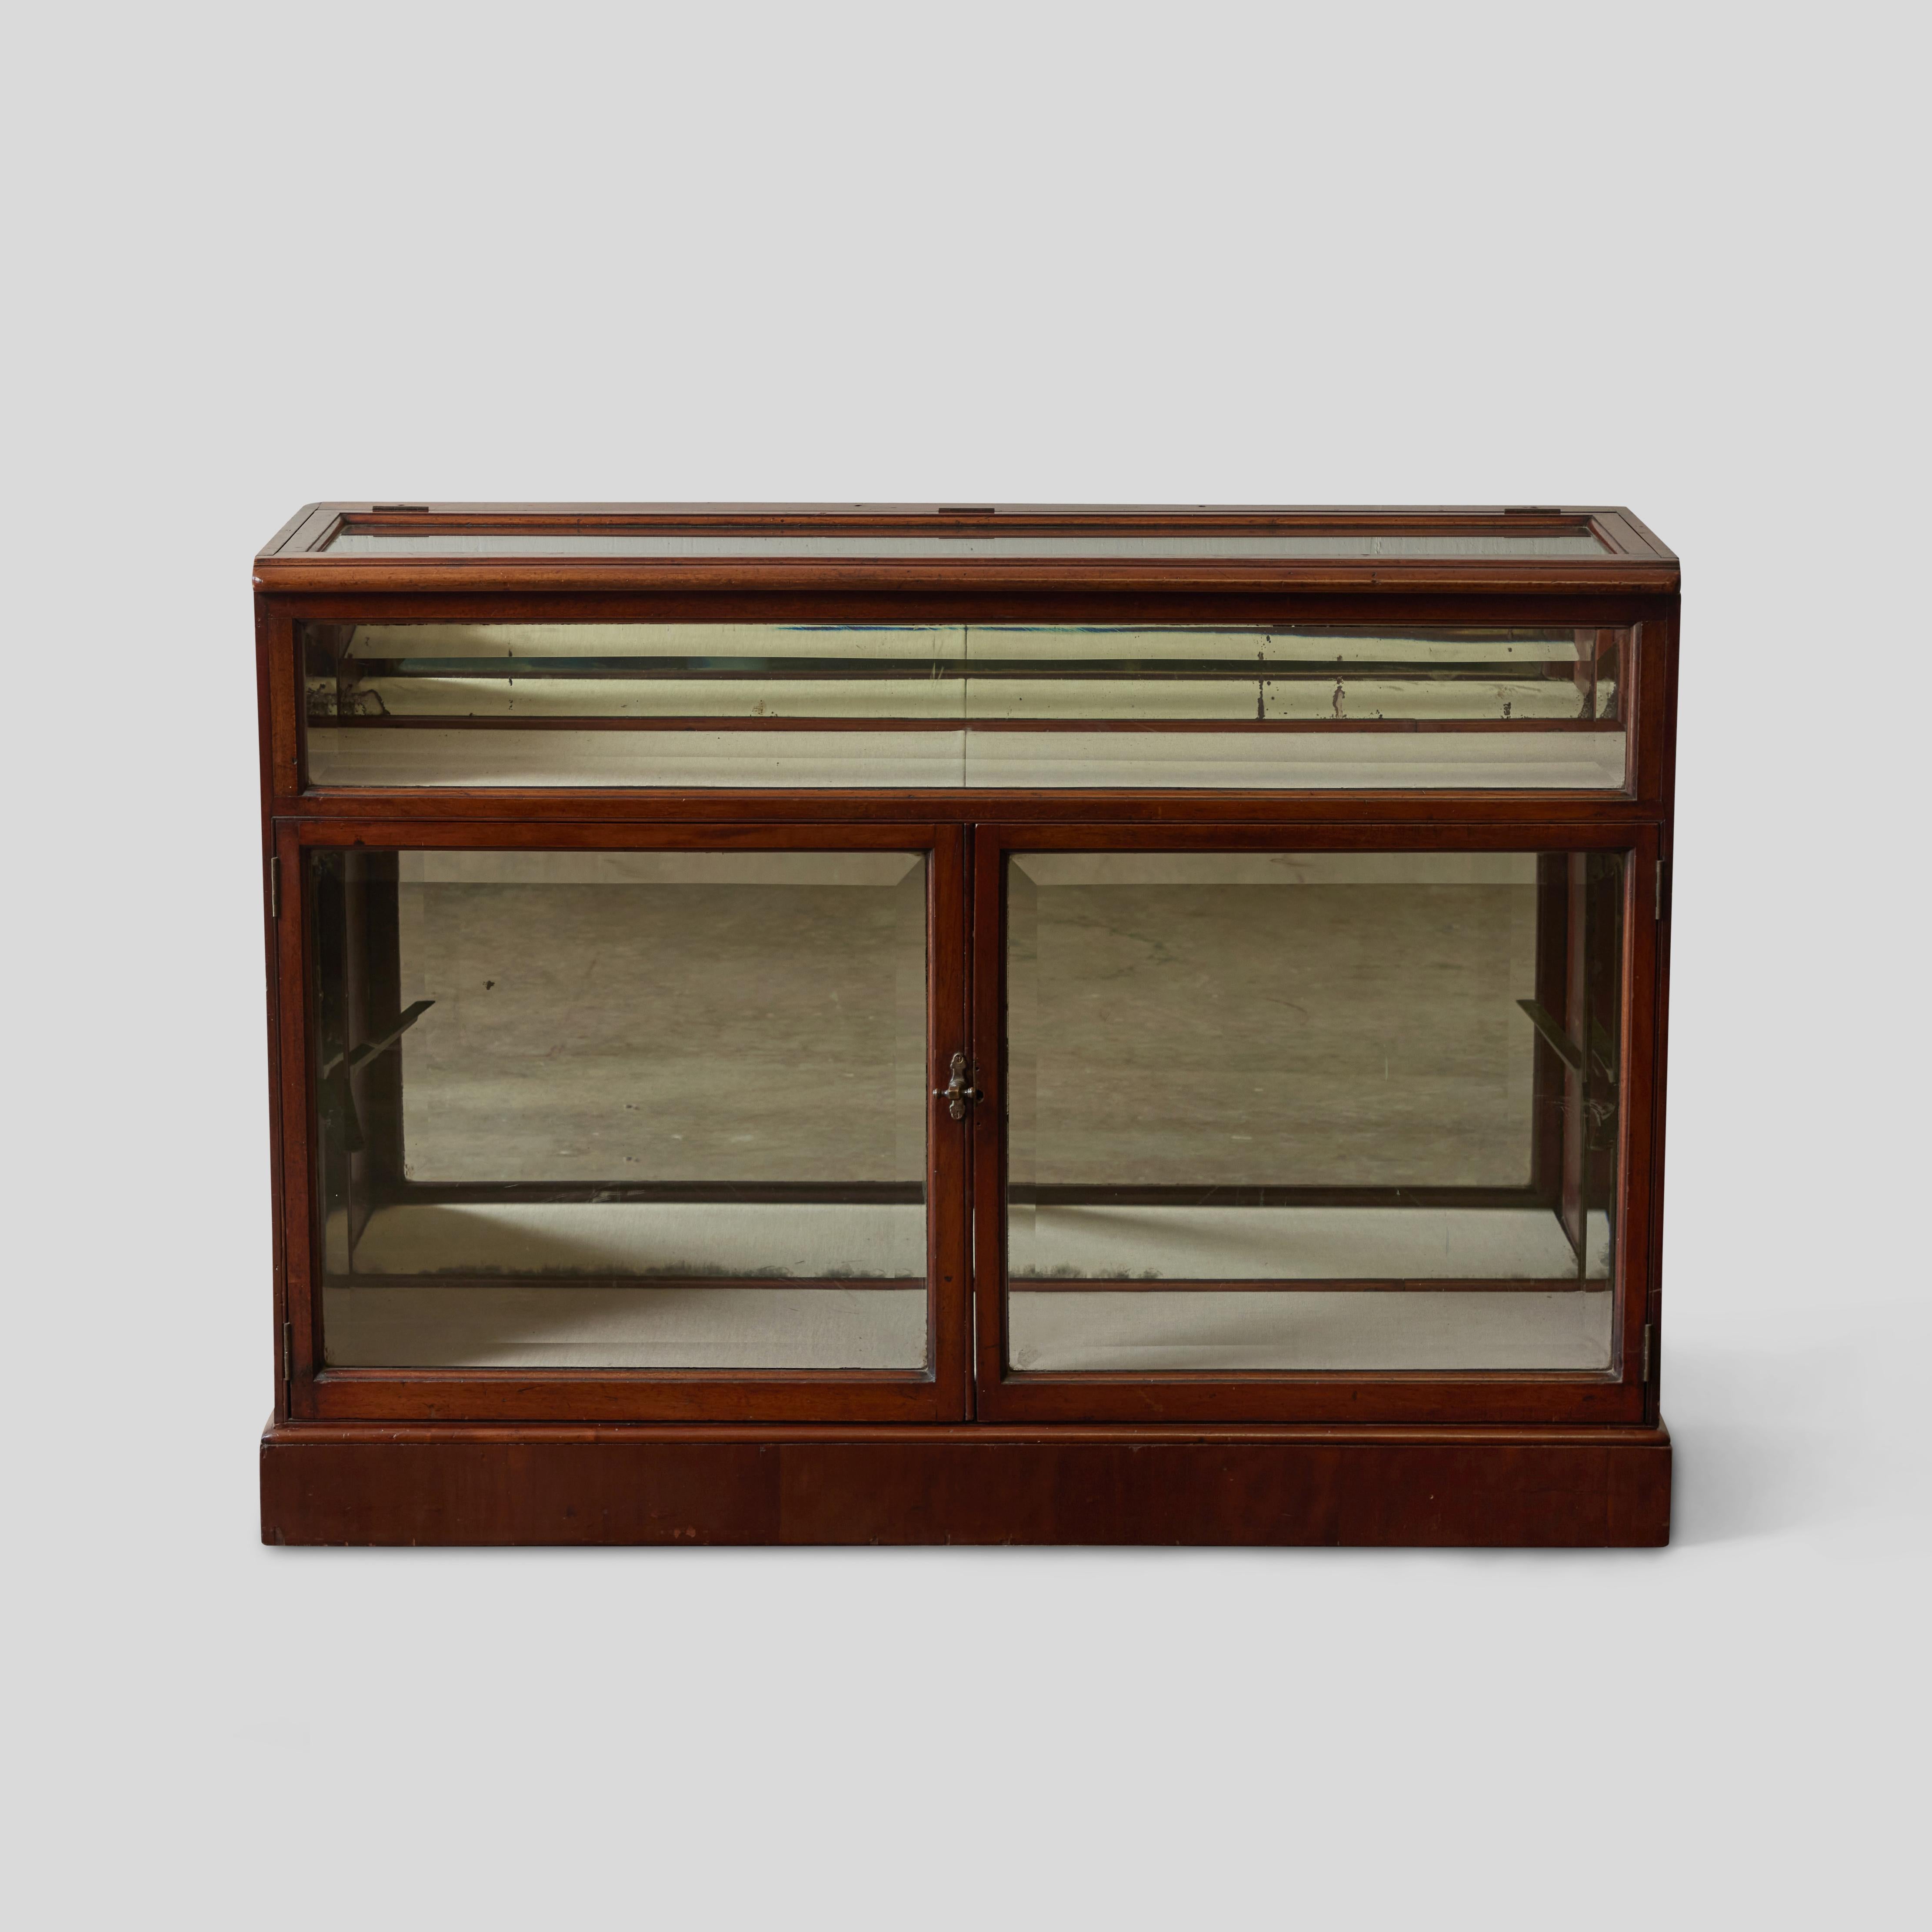 English 19th century glass rectangular display case with mahogany framework and mirrored back panelling. The two main compartments--an upper shelf tray and a lower cabinet display--make great opportunities for the presentation of a collection.